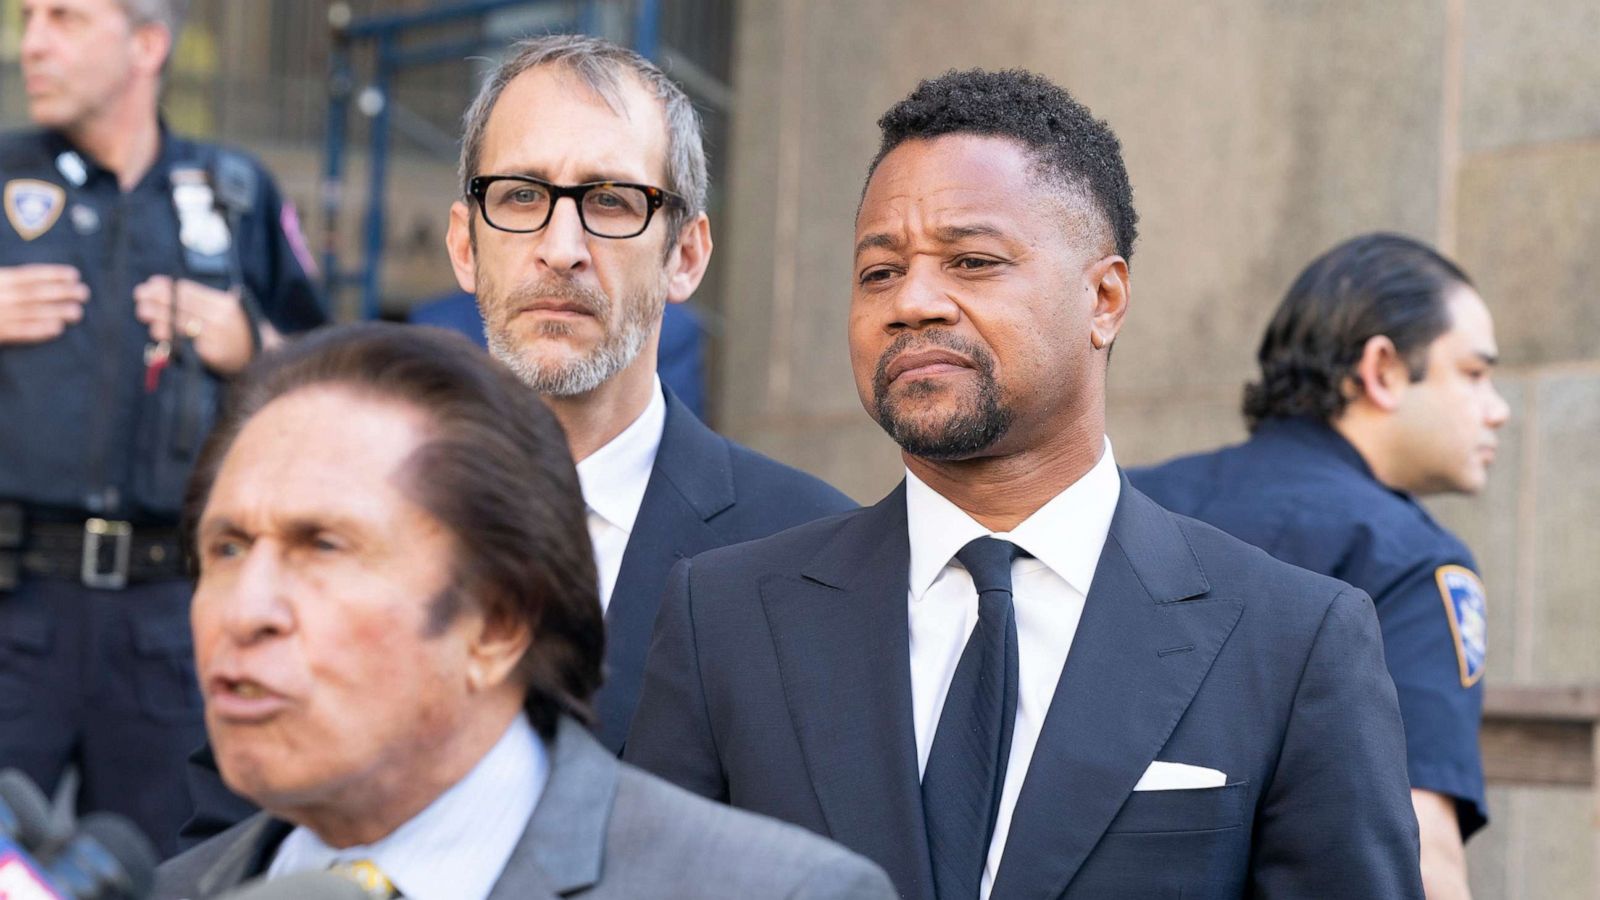 Cuba Gooding Jr. pleads guilty to sex charges - ABC News